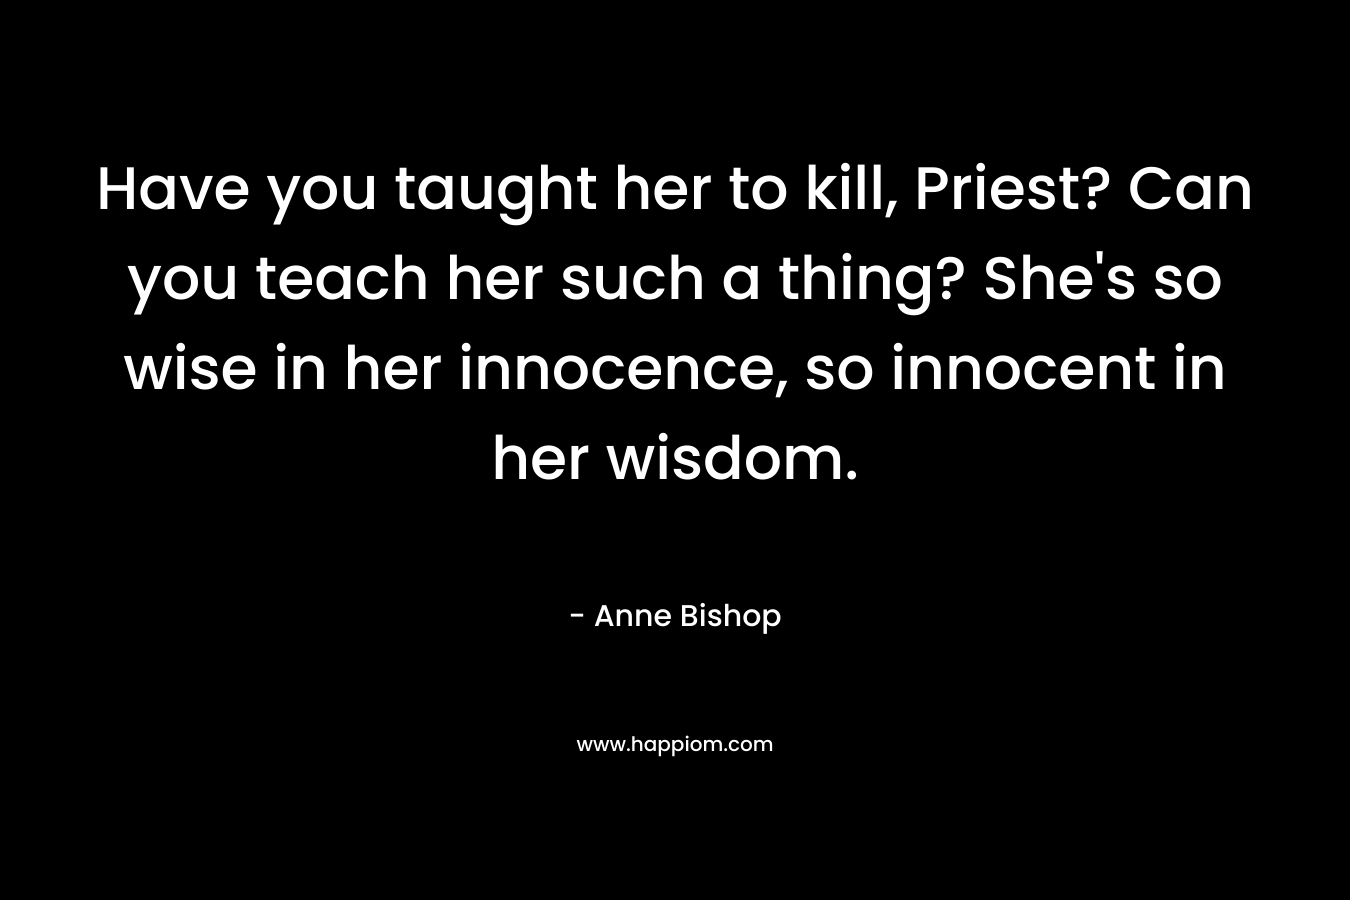 Have you taught her to kill, Priest? Can you teach her such a thing? She's so wise in her innocence, so innocent in her wisdom.